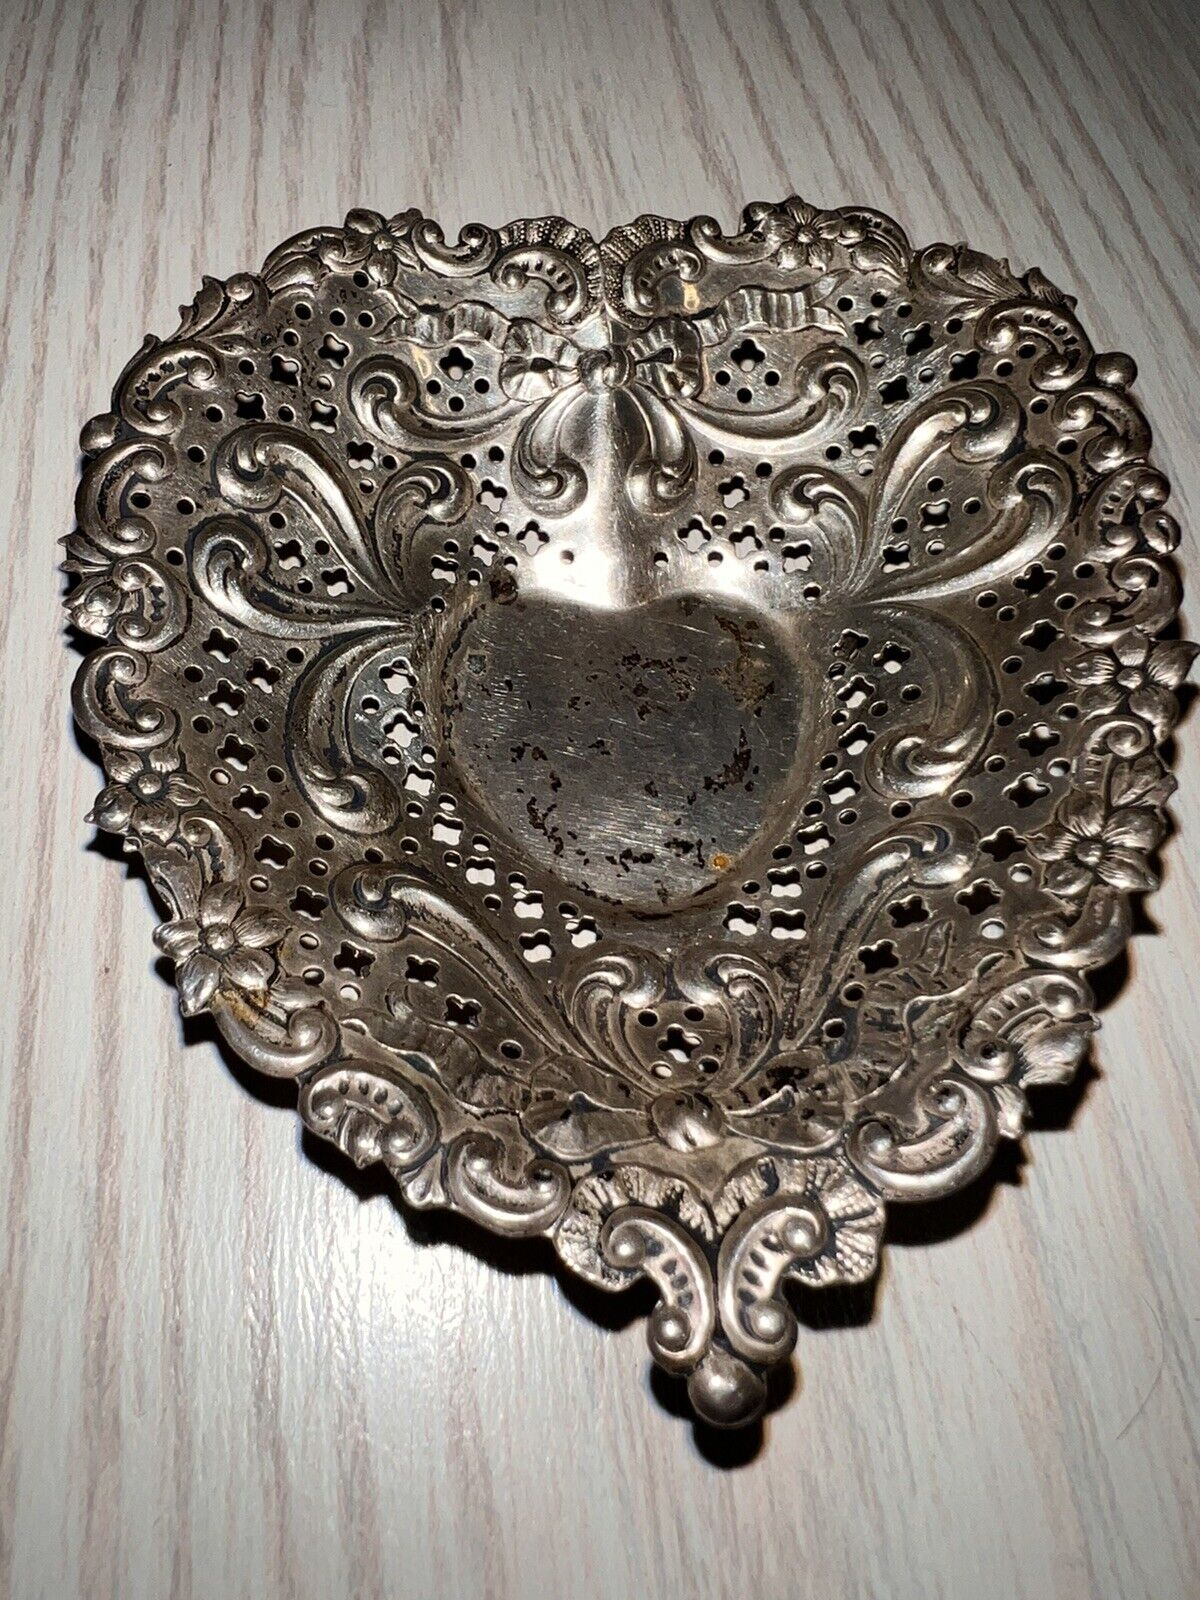 Vintage GORHAM #956 Solid Sterling Silver 925 HEART Shaped Small Dish 26.6 GRAMS